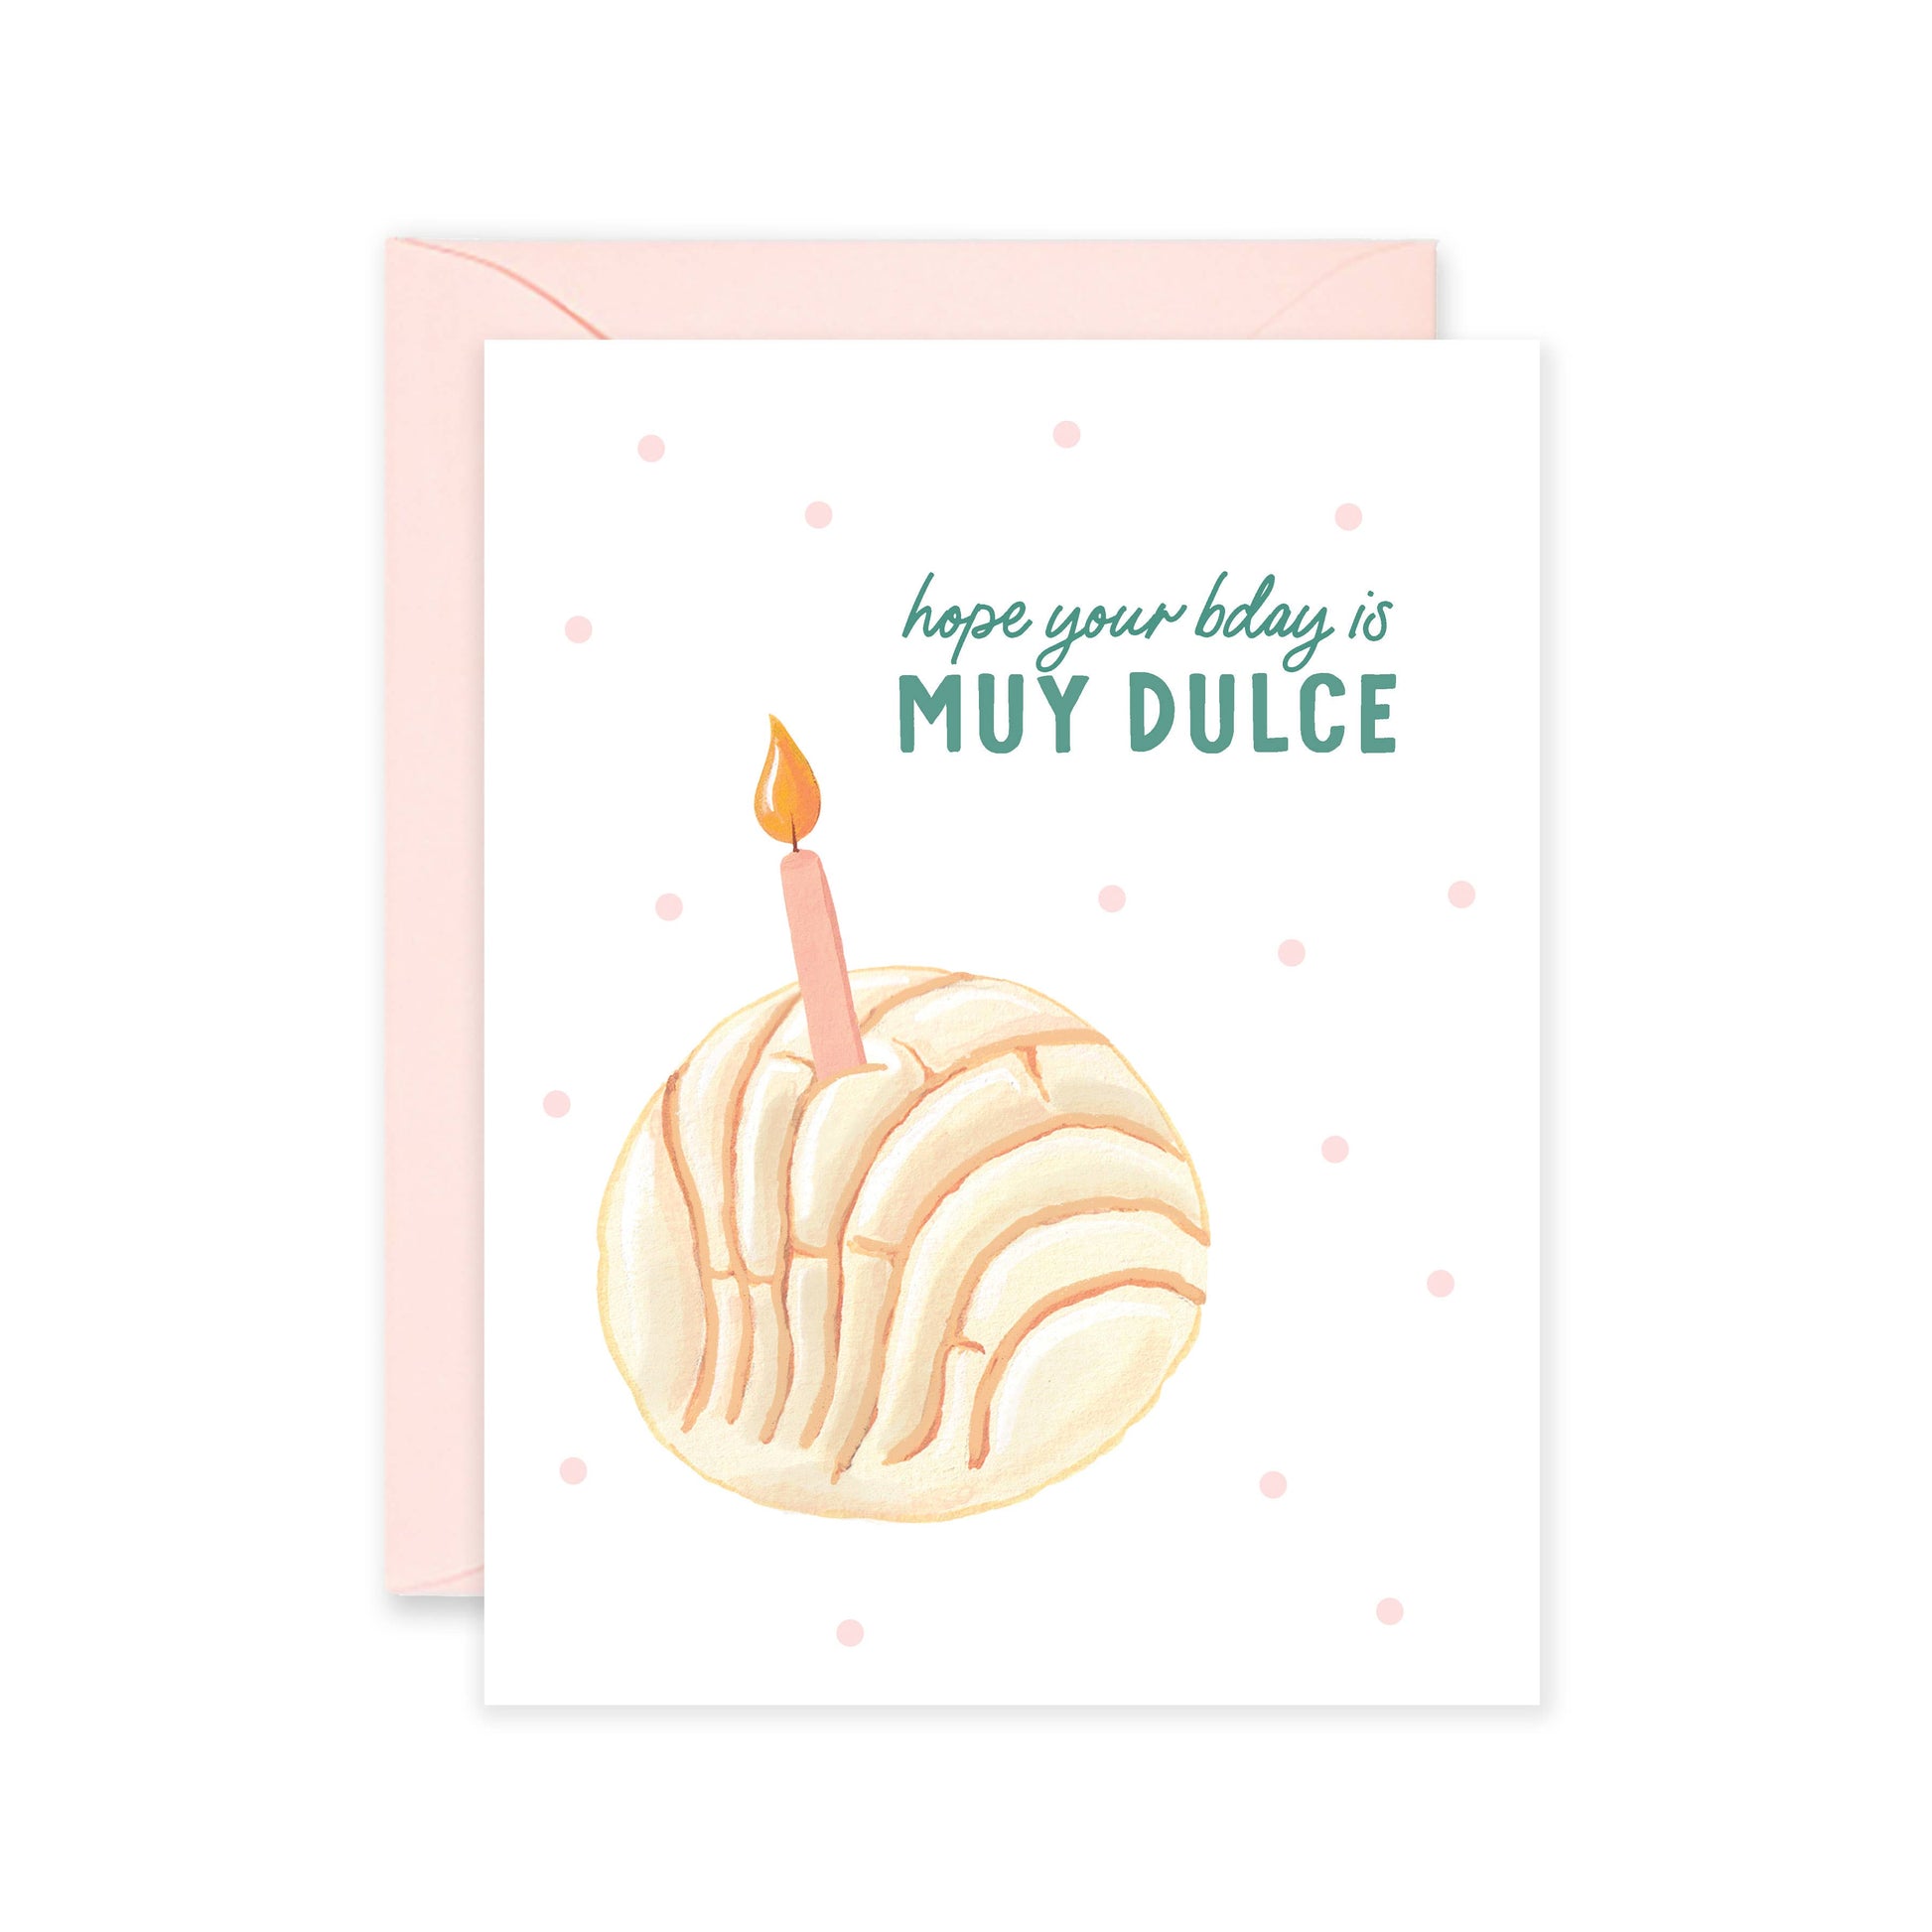 Greeting card with a pan dulce with a candle in it. It reads, "hope your bday is MUY DULCE"